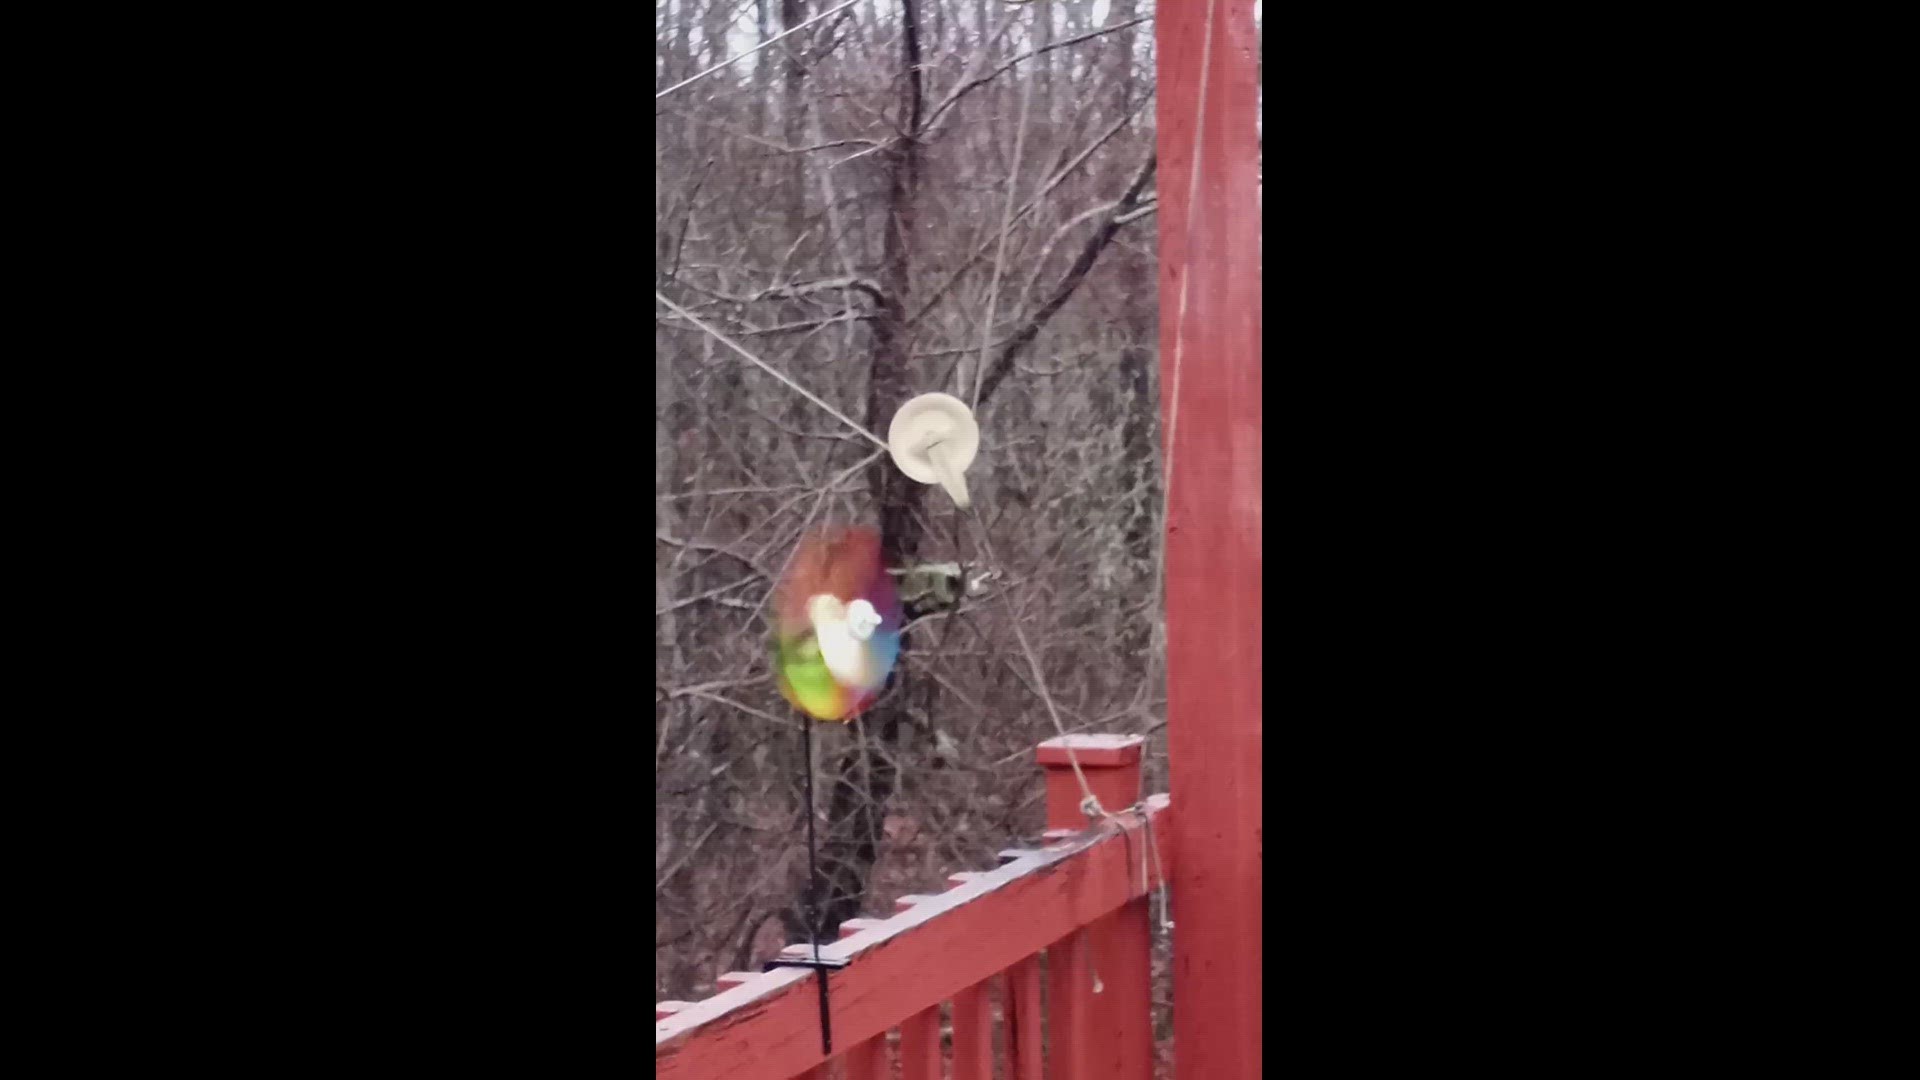 My husband and I took these from our gardens and placed them on our deck rail. Fun to watch!
Credit: Kathy Williamson